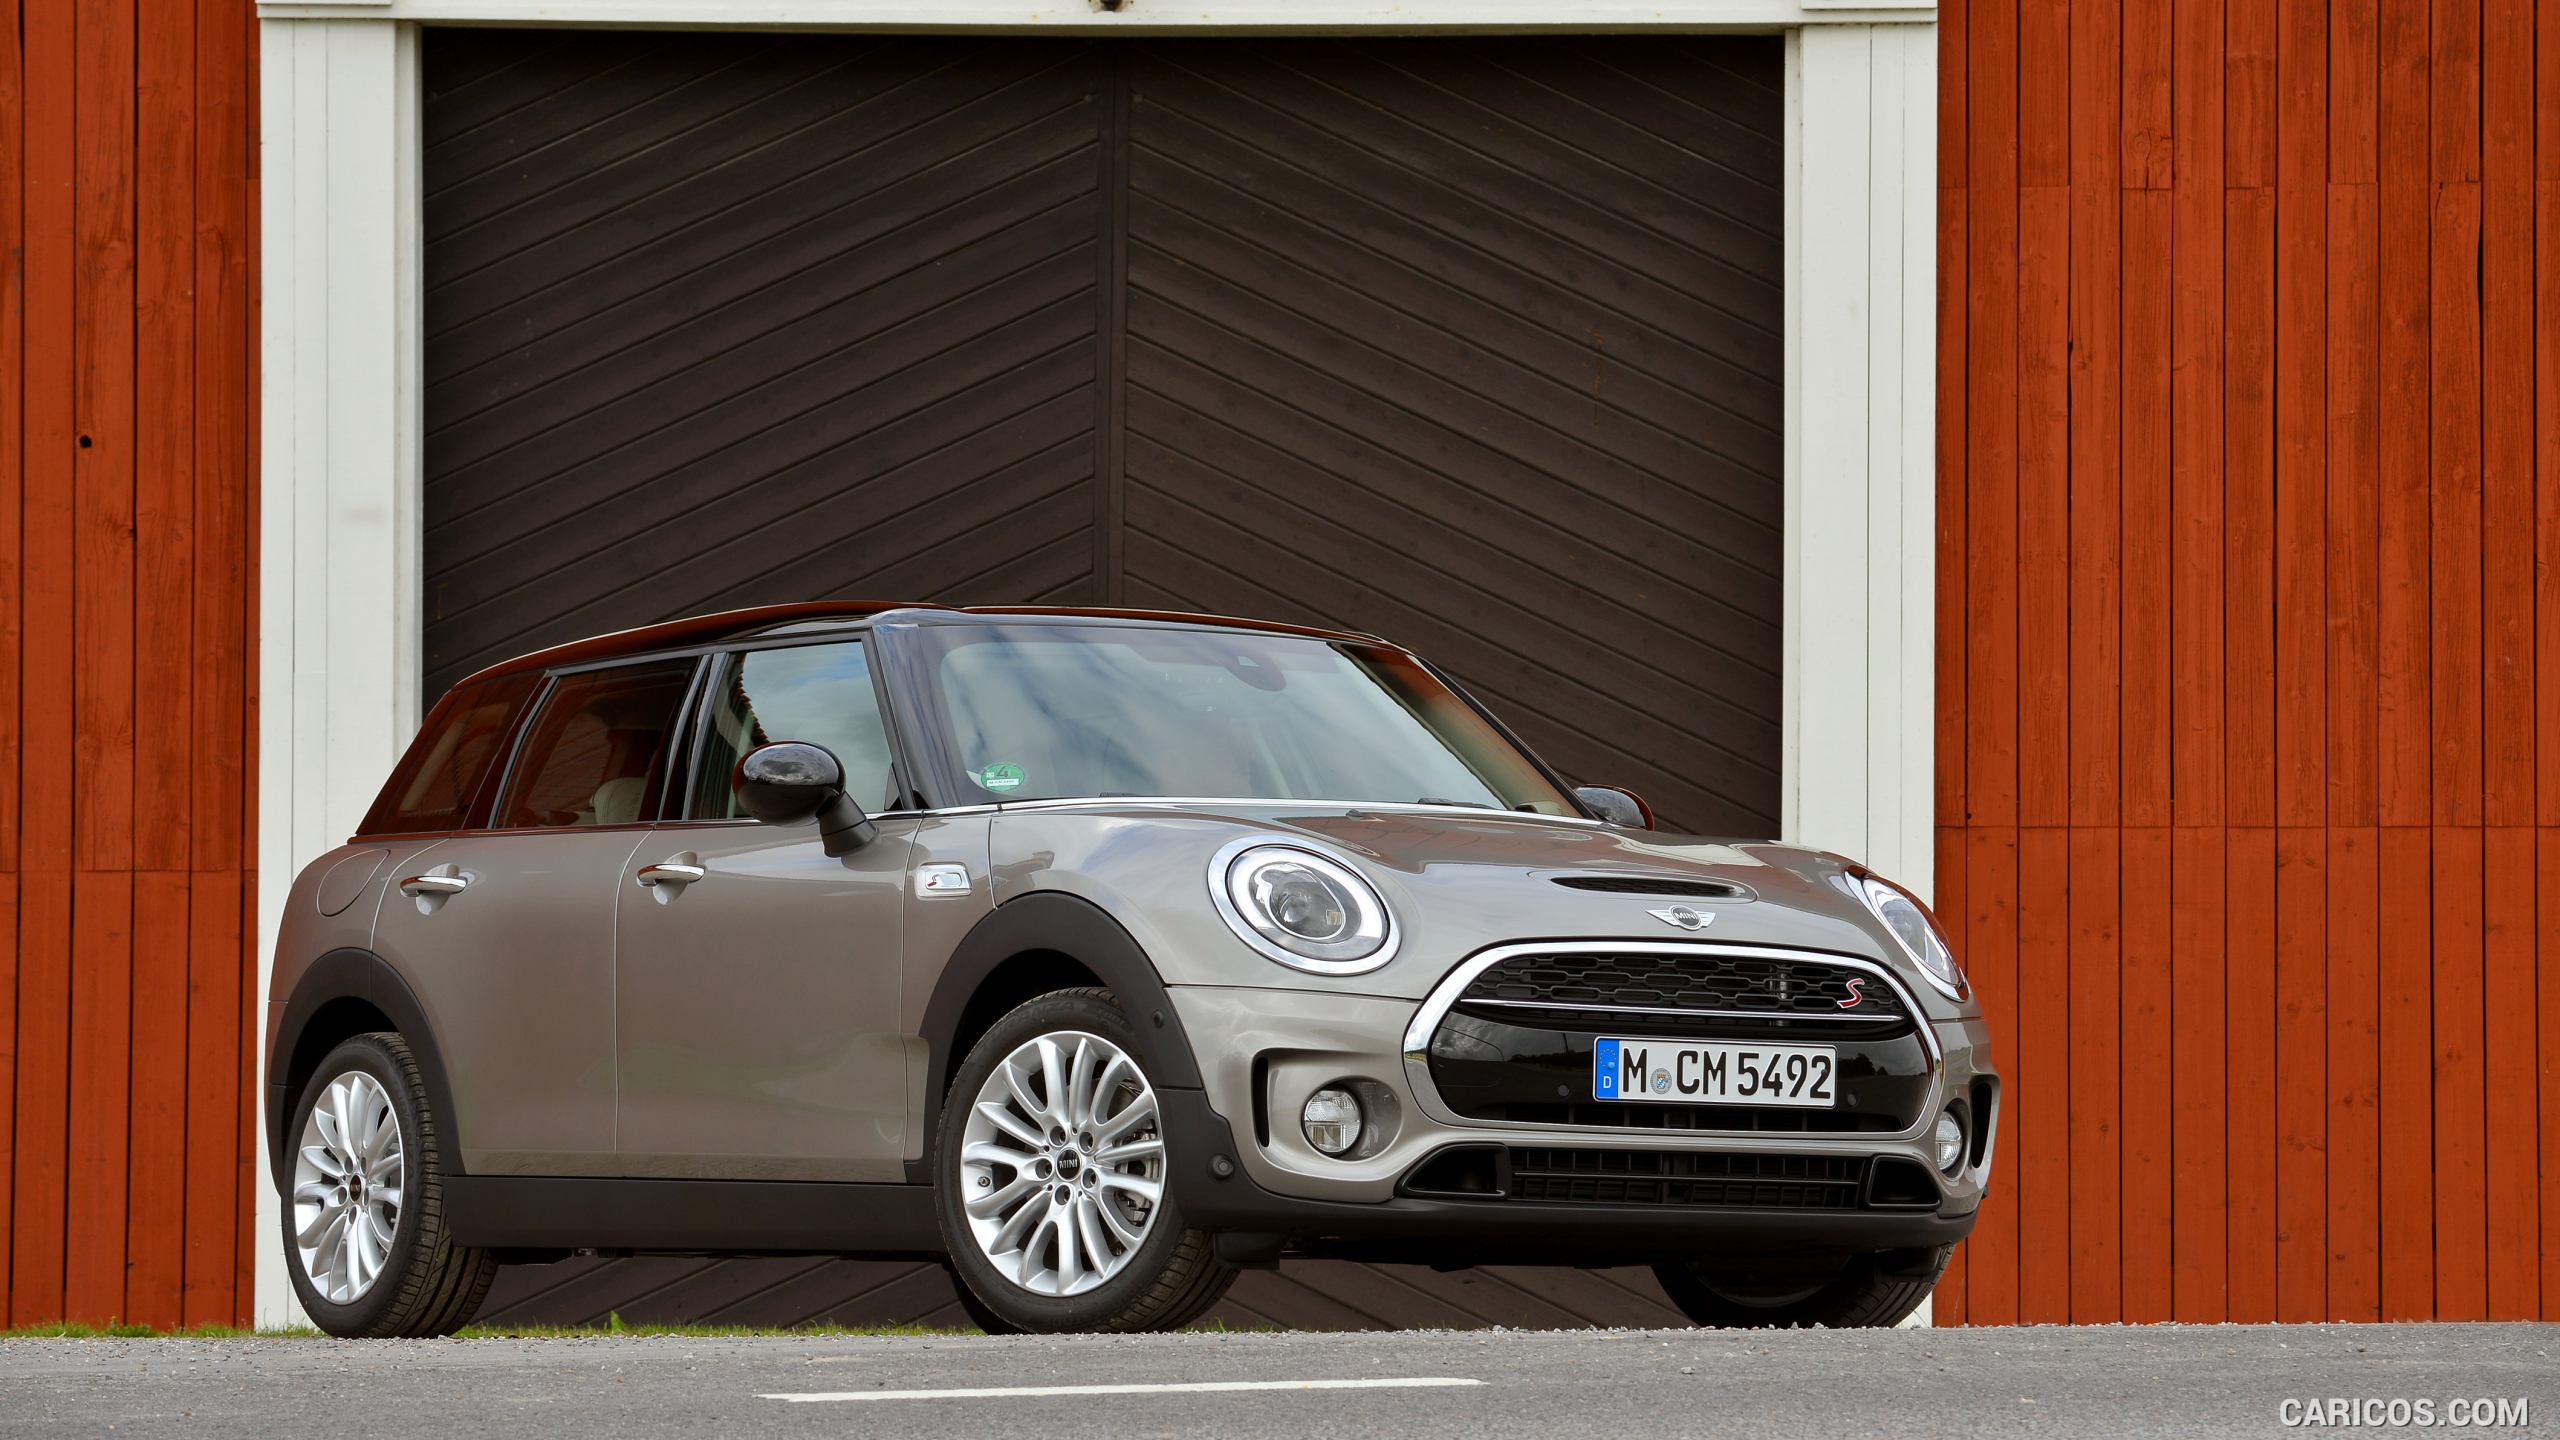 2016 MINI Cooper S Clubman in Metallic Melting Silver - Front, #187 of 380